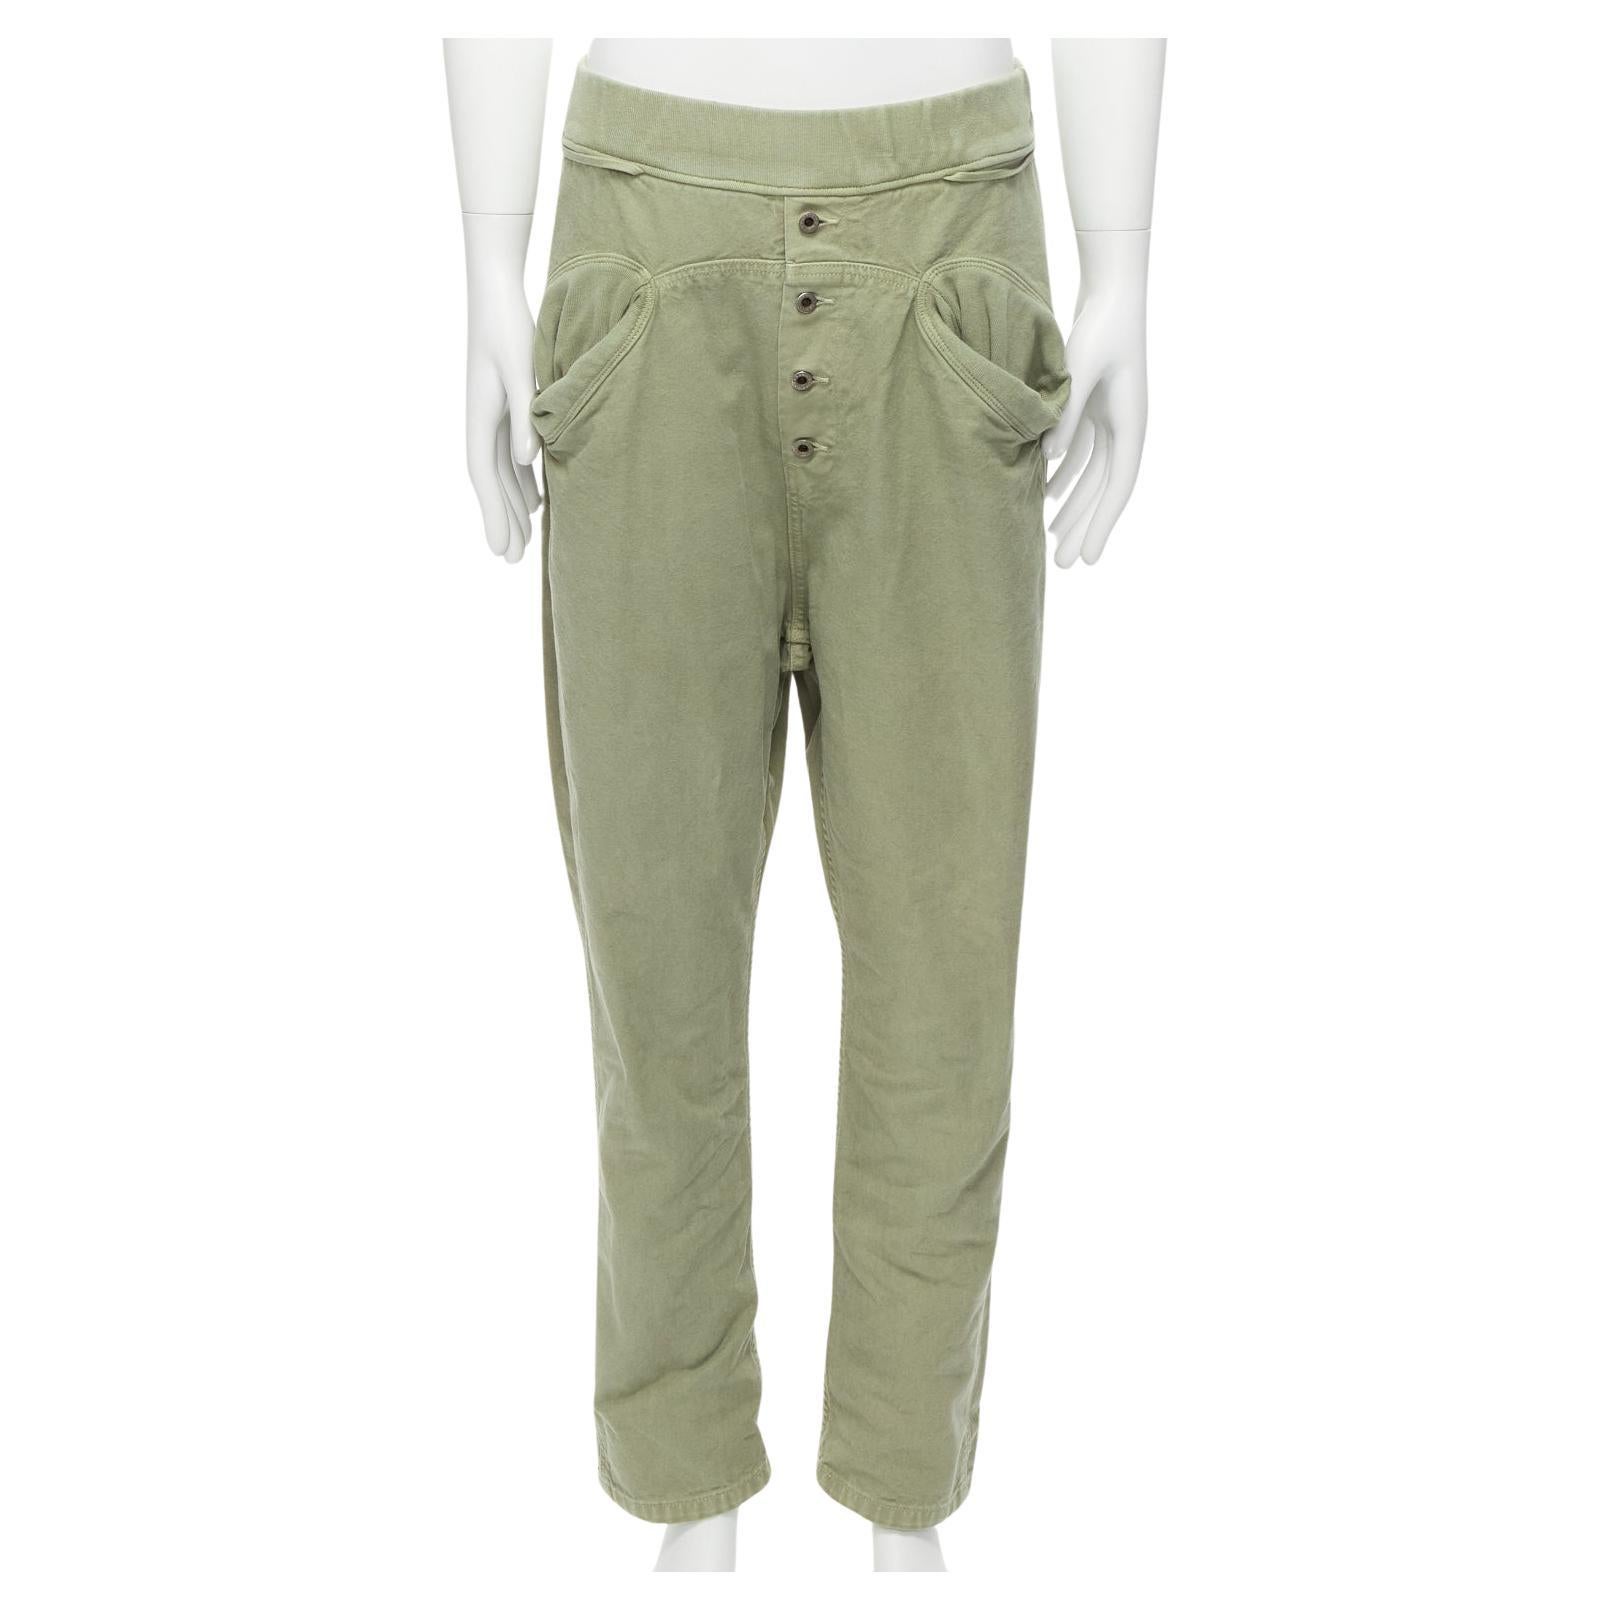 KAPITAL 100% washed cotton green distressed buttons elasticated waist pant JP3 L For Sale